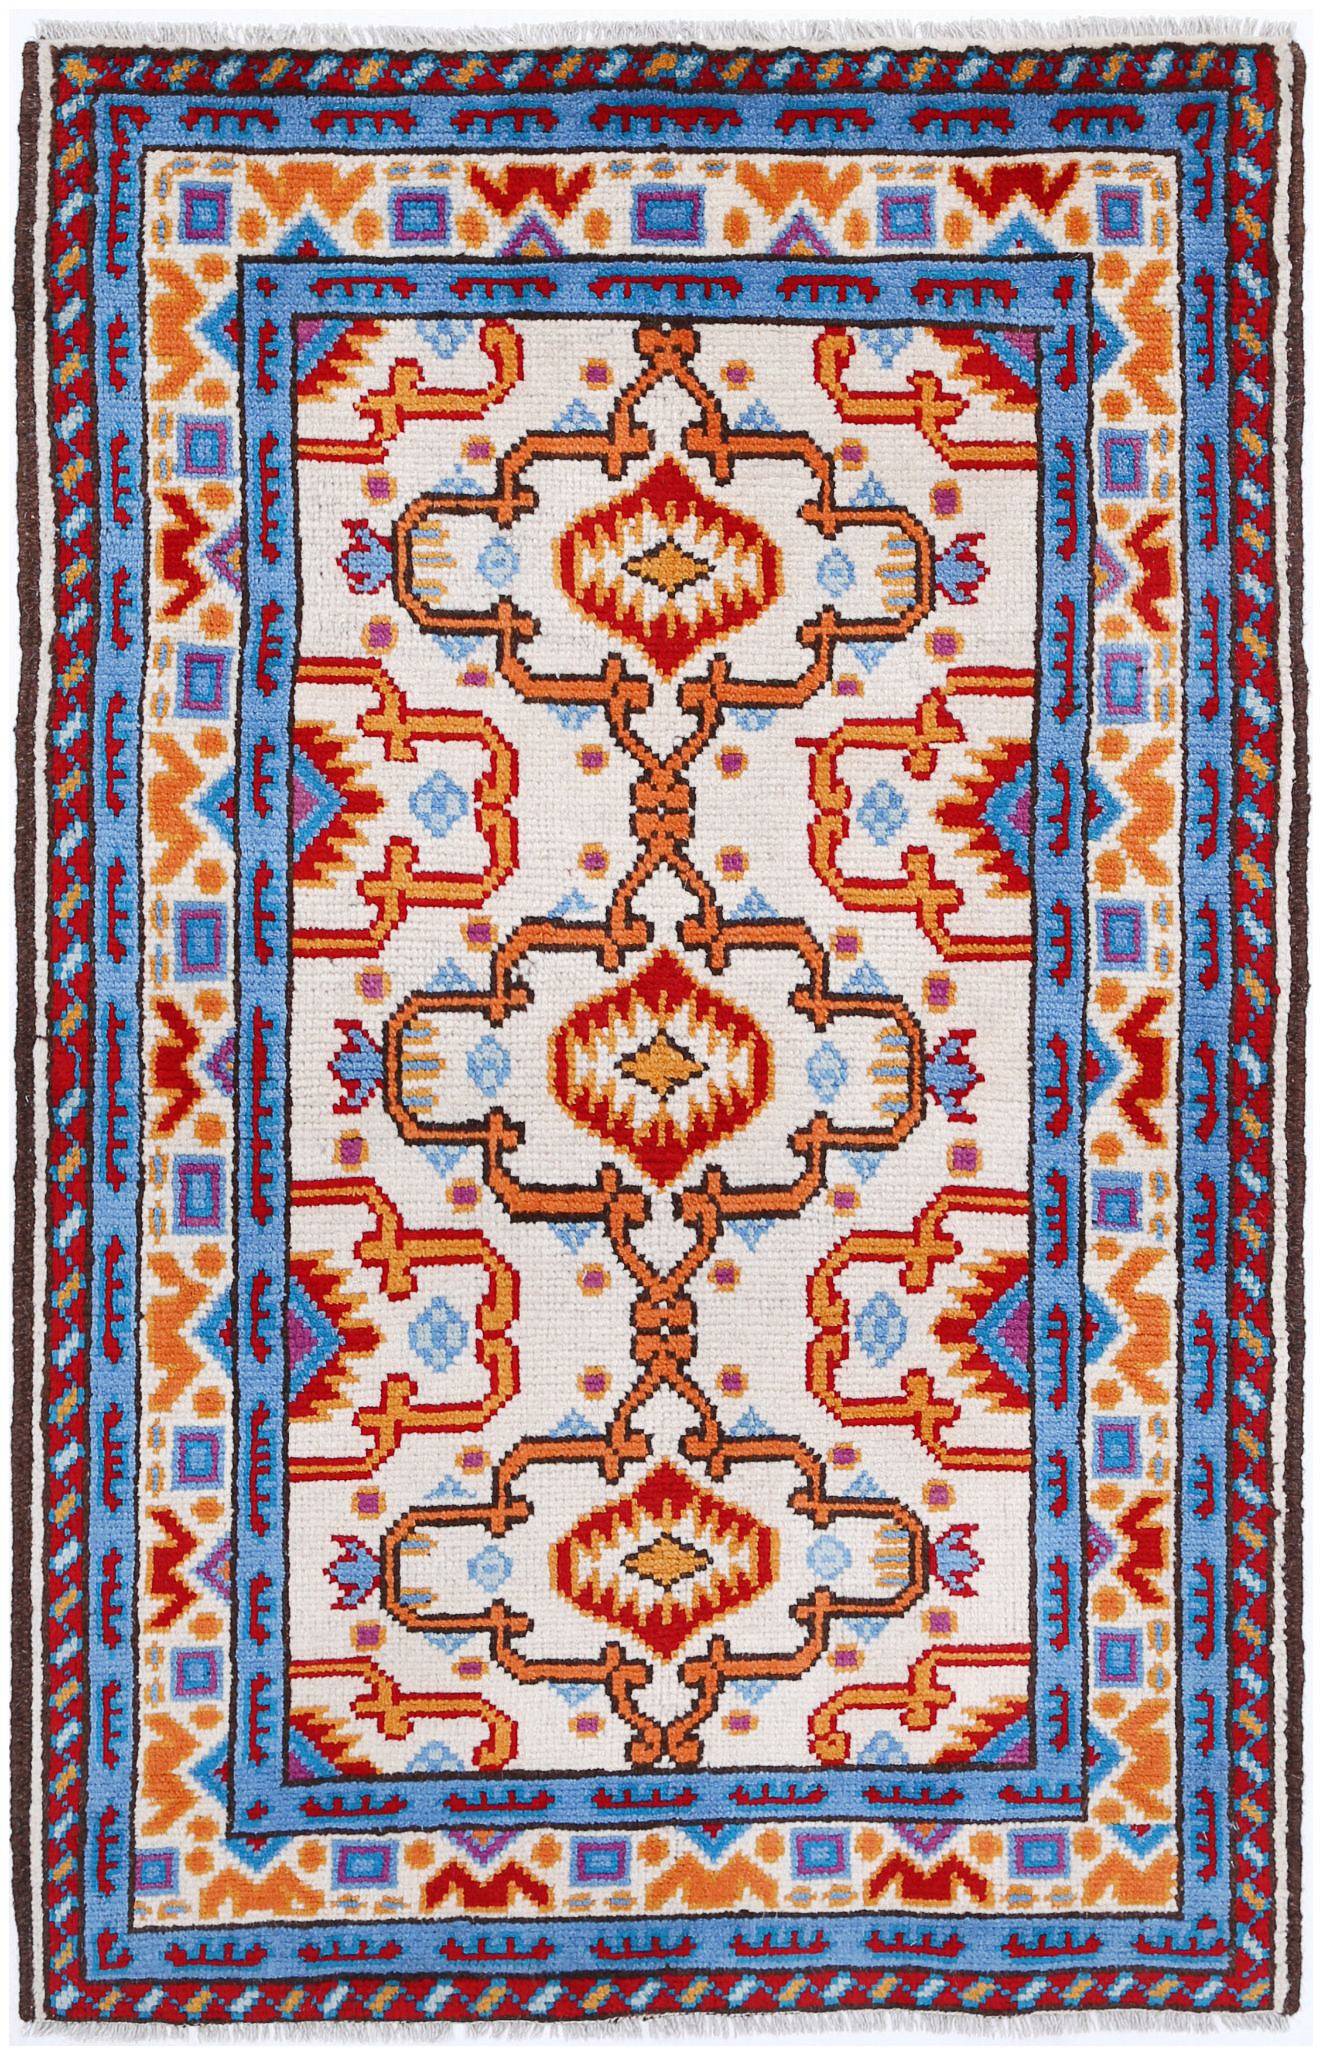 Revival-hand-knotted-qarghani-wool-rug-5014042.jpg